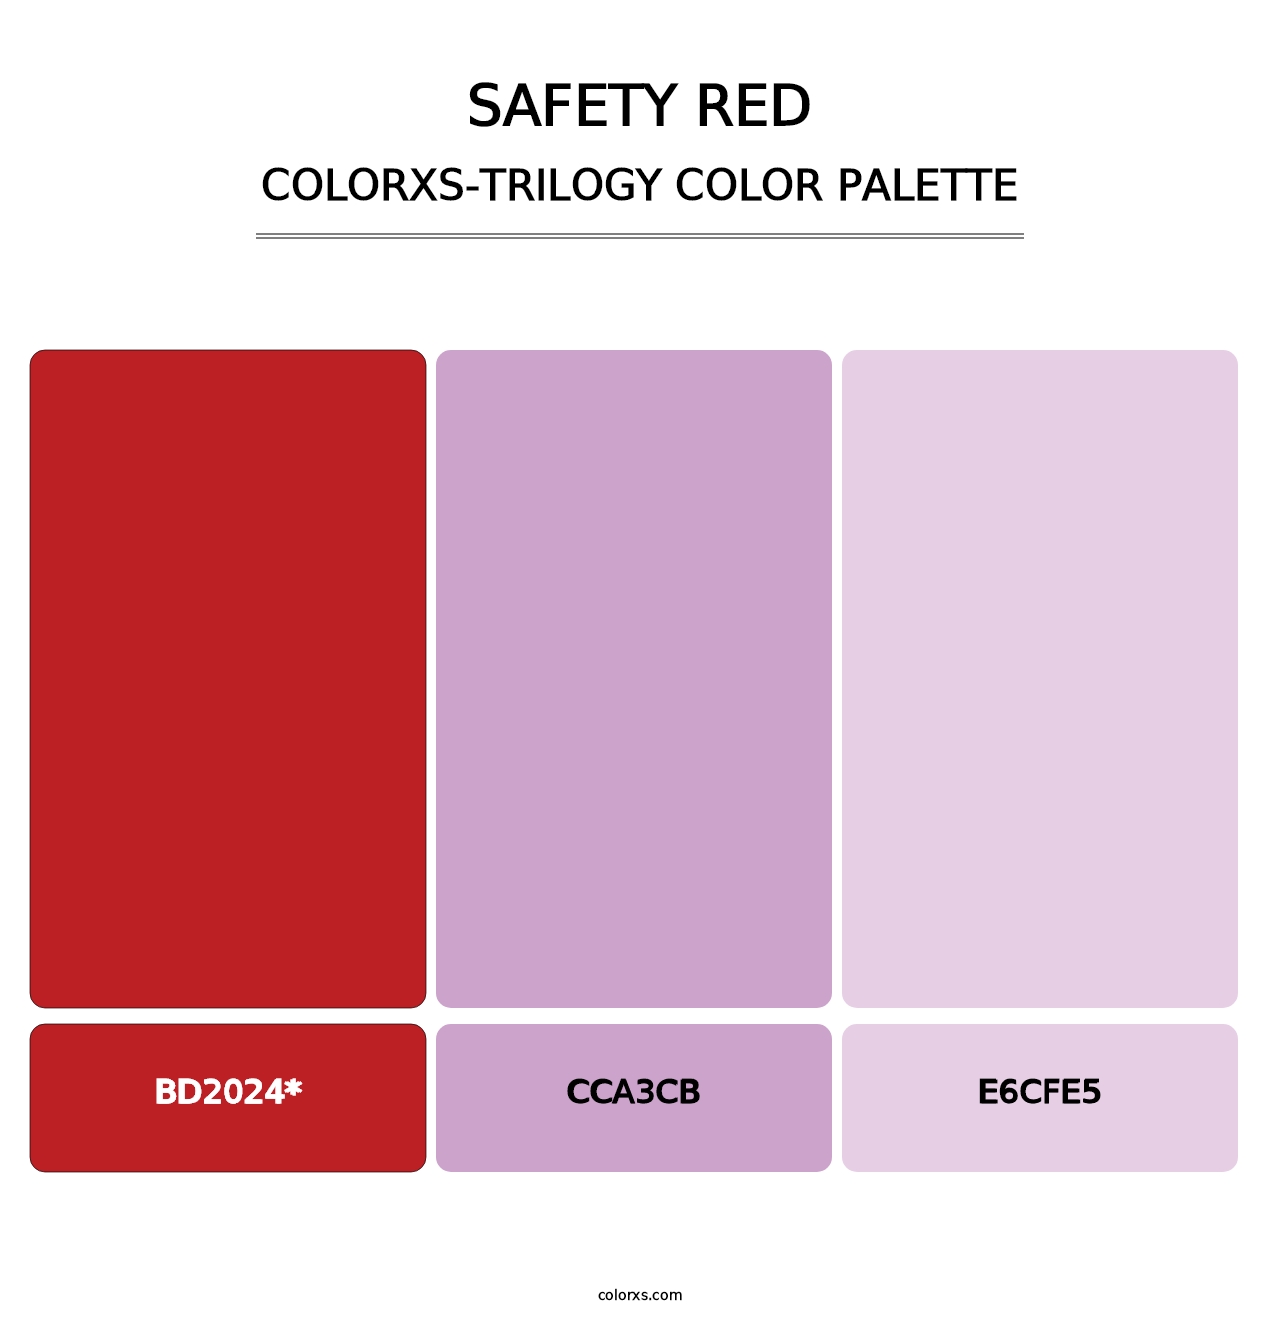 Safety Red - Colorxs Trilogy Palette